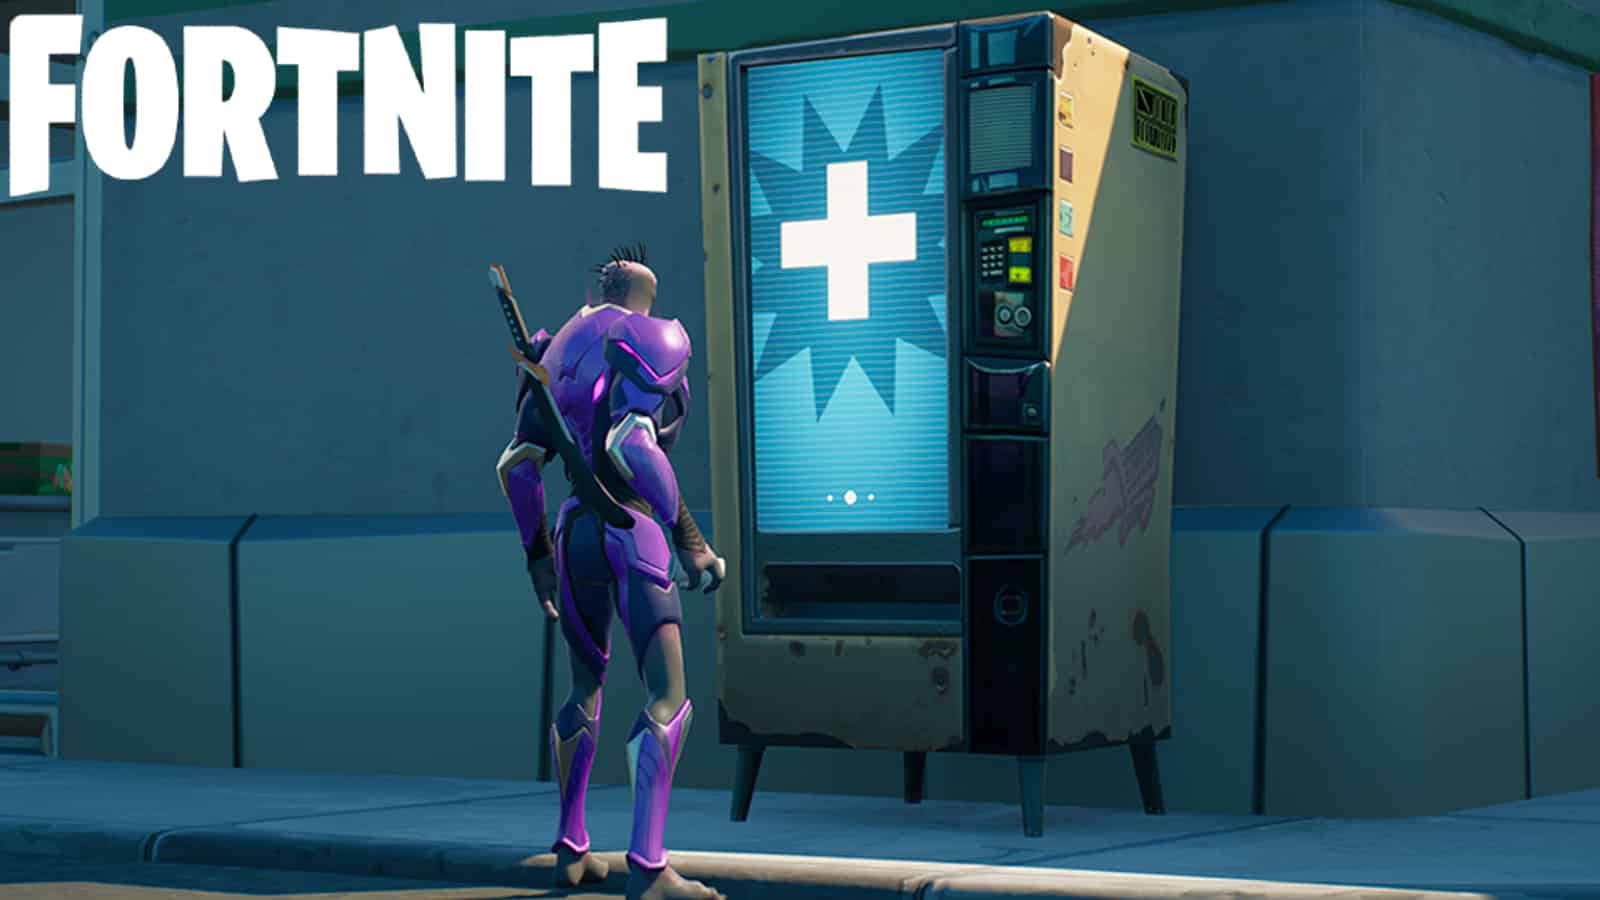 Fortnite players standing in front of Mending Machine